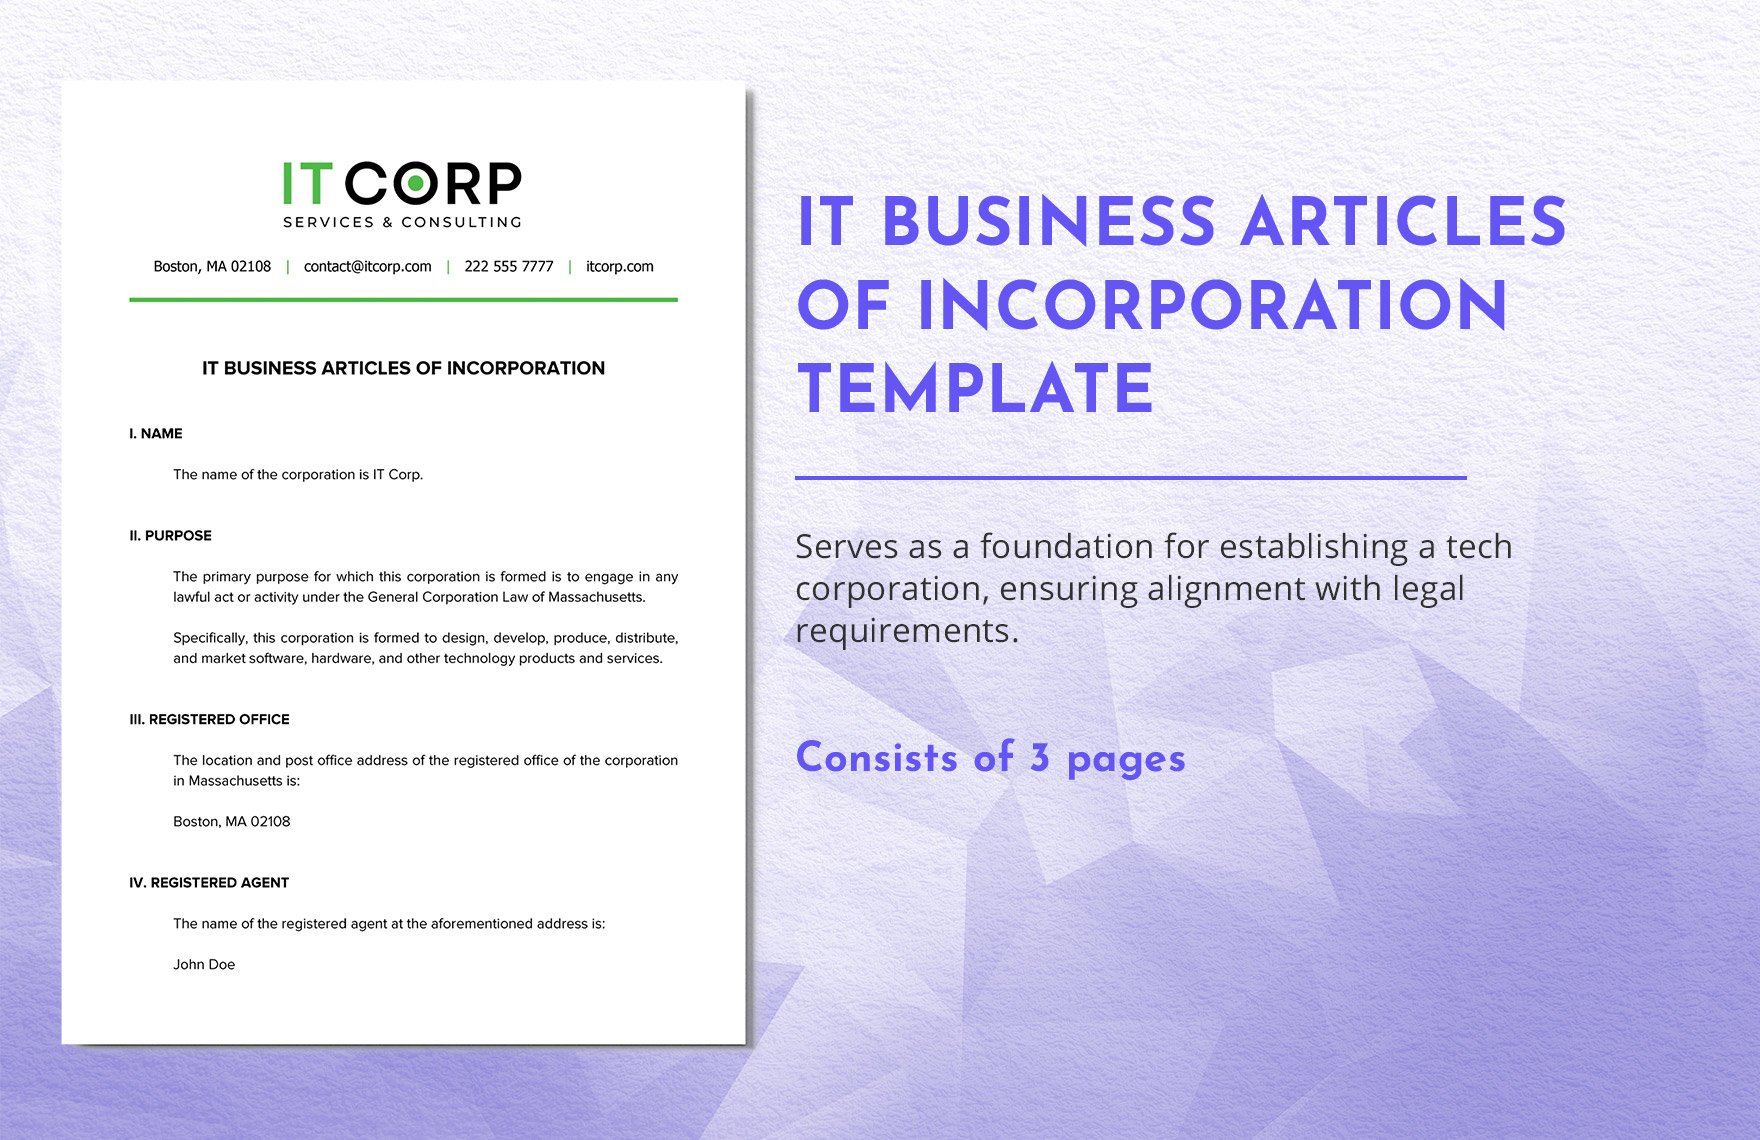 IT Business Articles of Incorporation Template